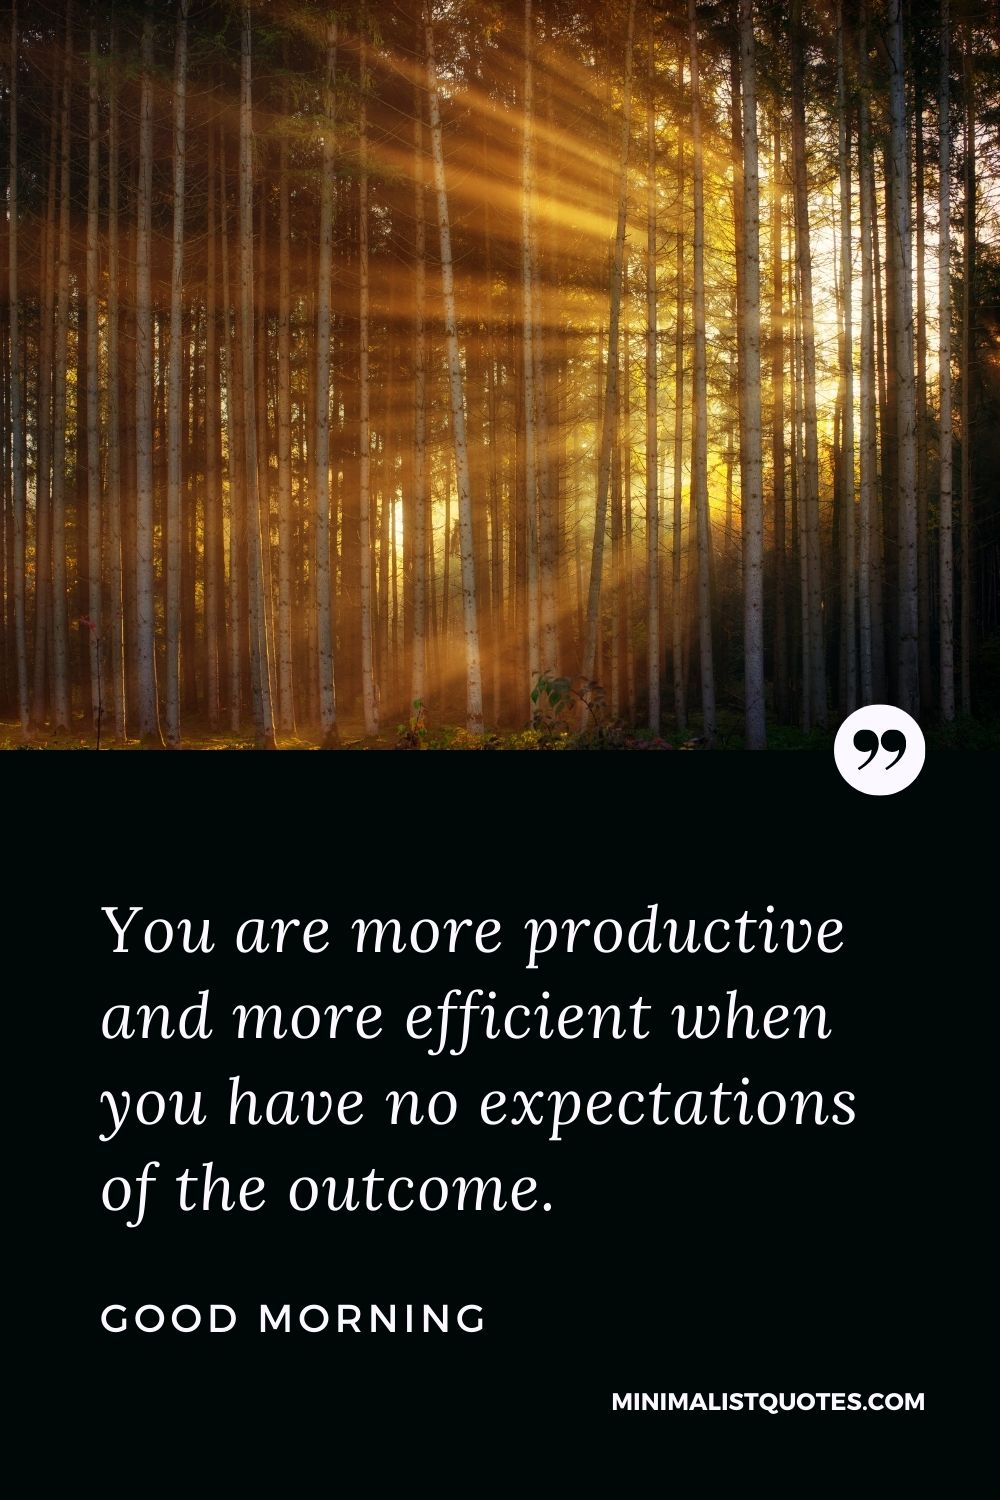 Good Morning Wish & Message: You are more productive and more efficient when you have no expectations of the outcome.